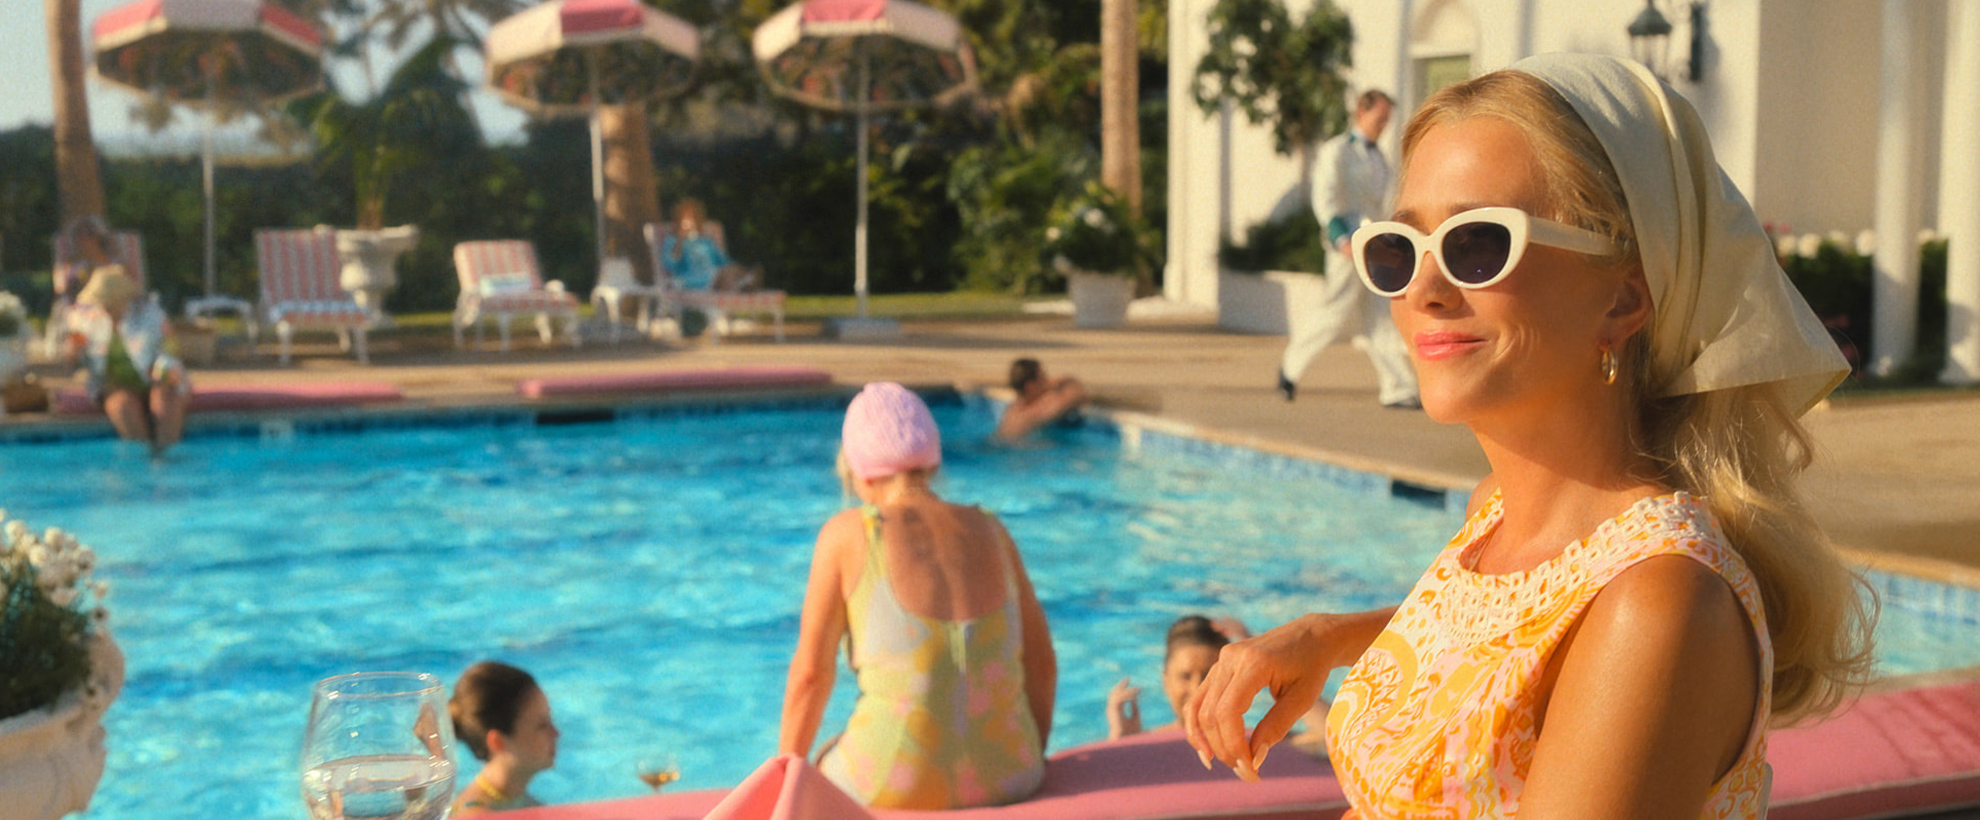 Kristen Wiig sits poolside in a 1960s holiday resort setting